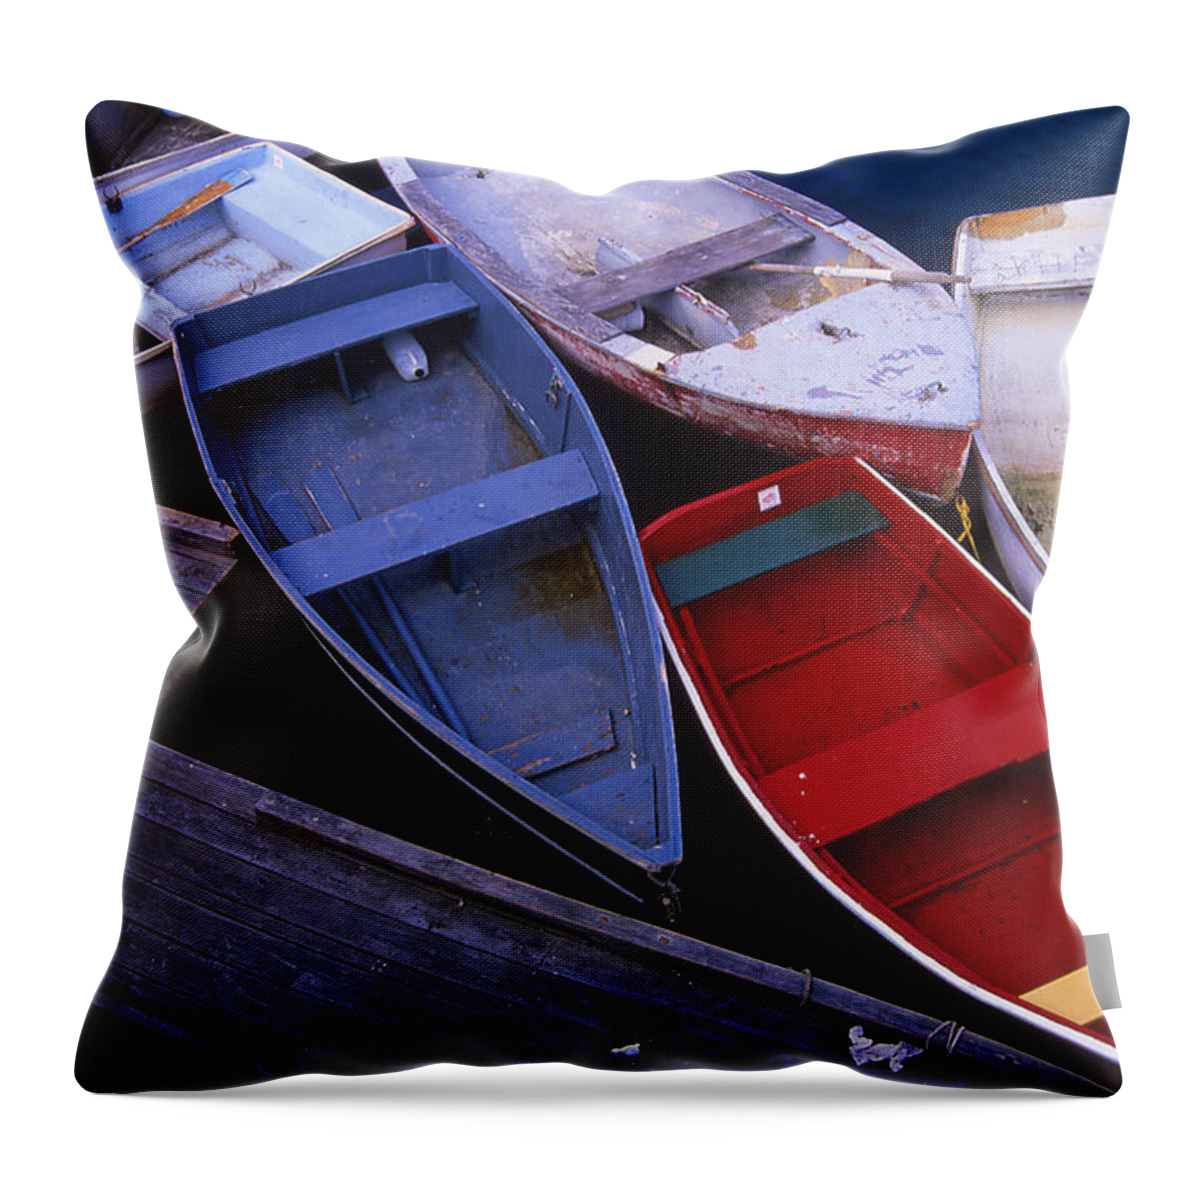 Landscape New England Boat Fishing Nautical Coast Throw Pillow featuring the photograph Cnrf0906 by Henry Butz